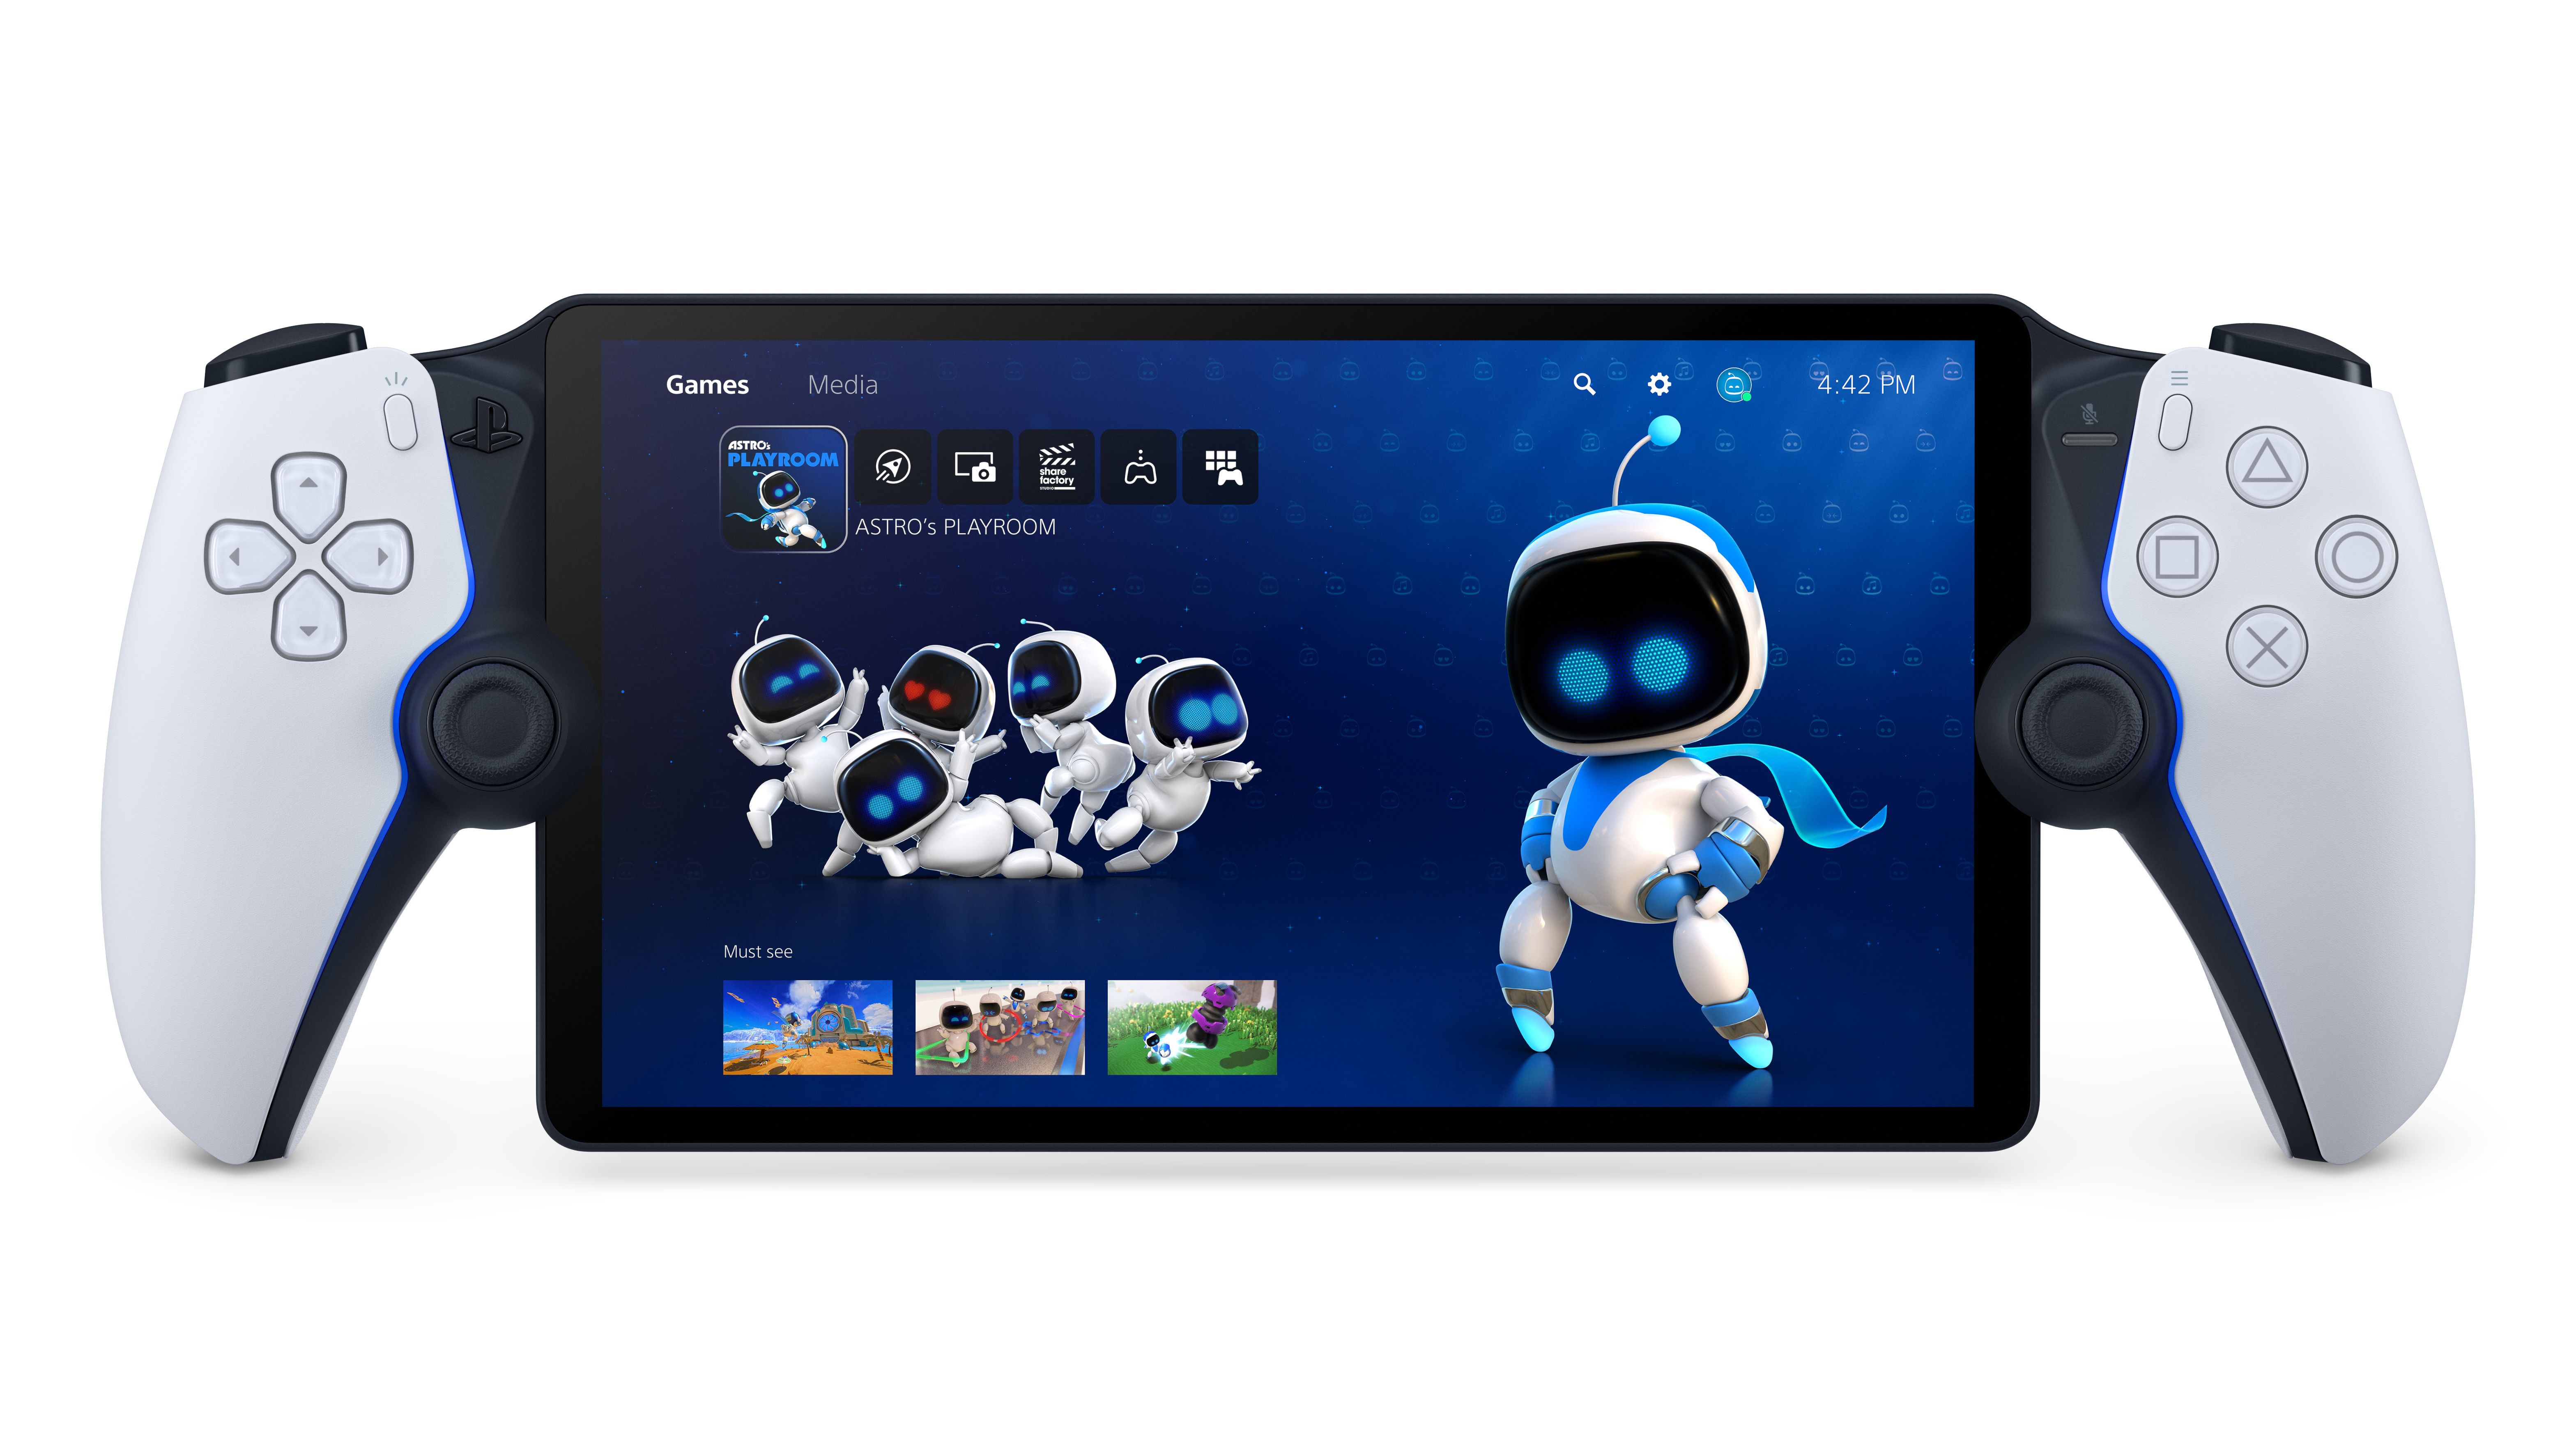 PlayStation Portal — The Newest Handheld Gaming Device